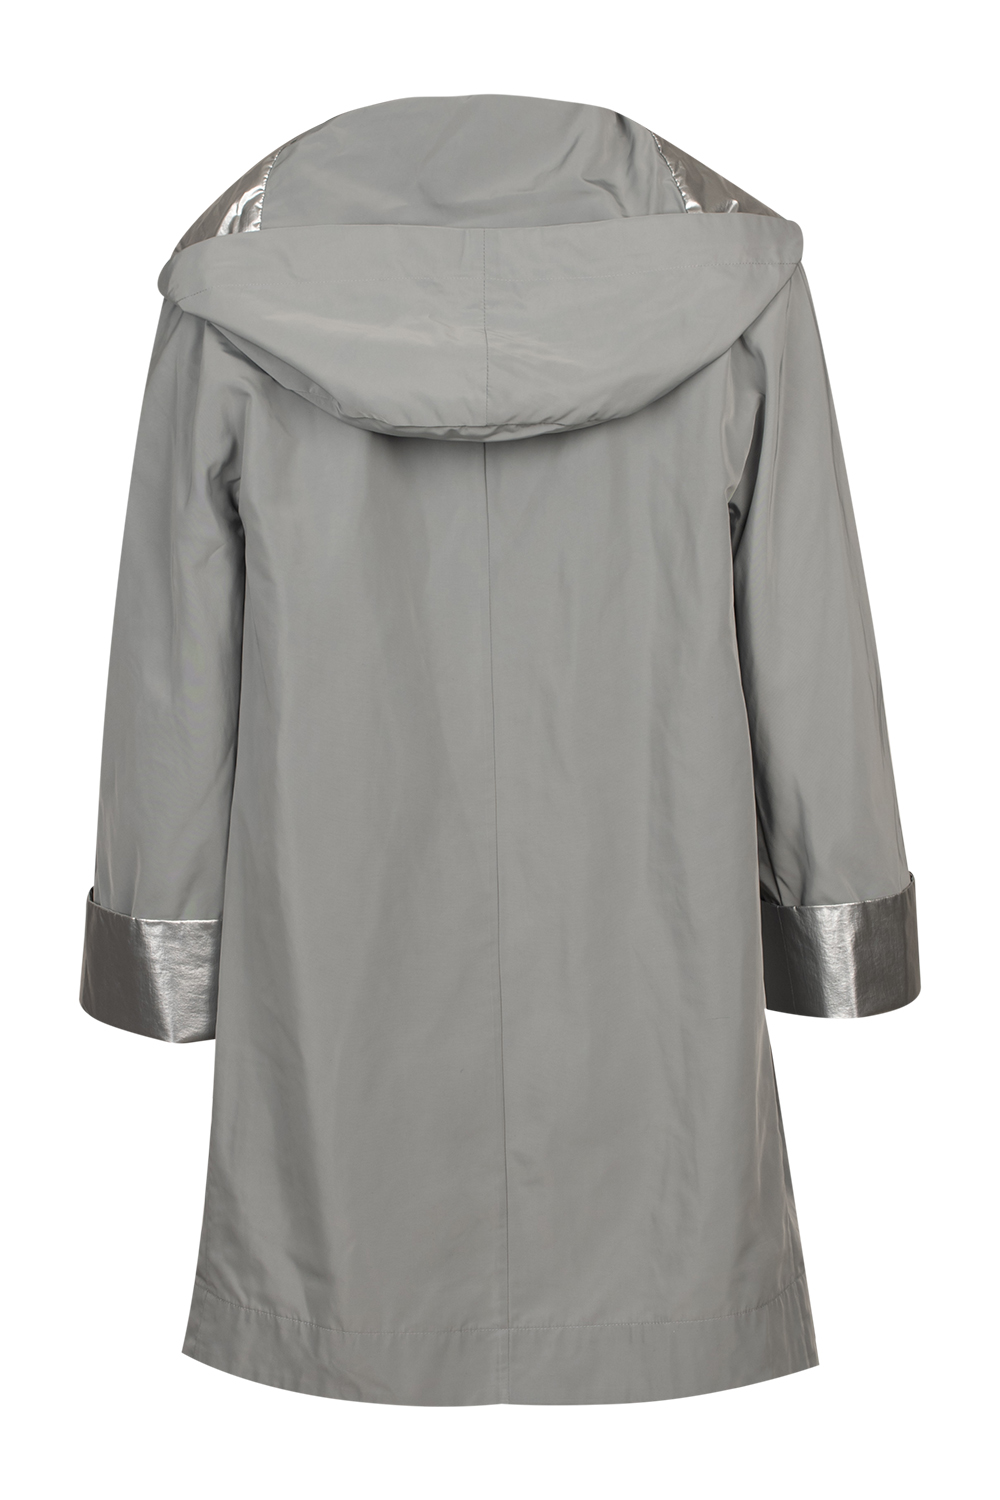 Hooded Light Weight Raincoat with Cuffed 3/4 Sleeve